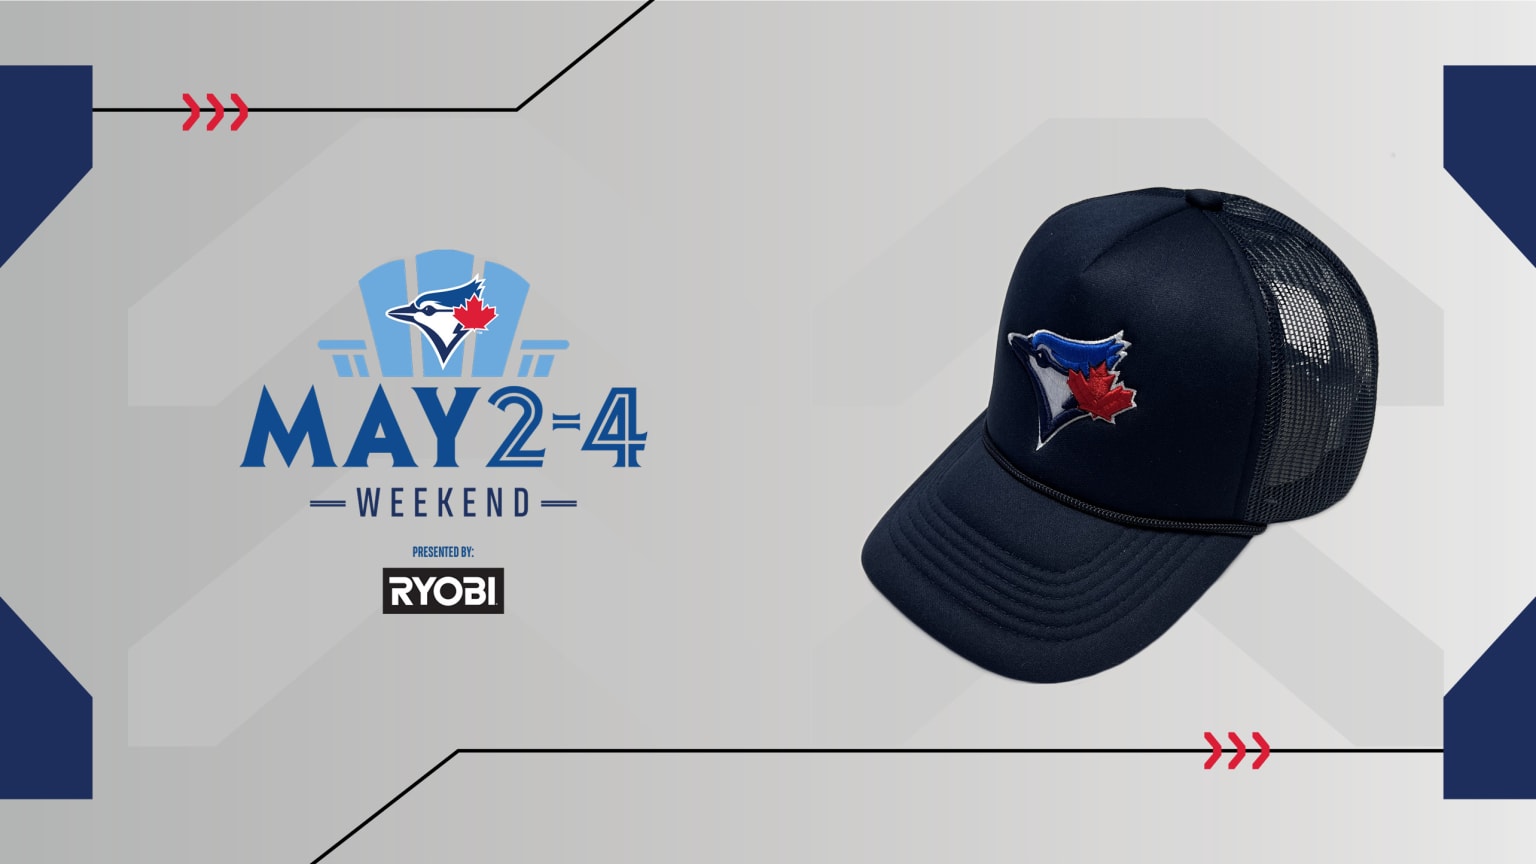 Crabby Joe's Bar & Grill - It's 2022 Toronto Blue Jays Season✨ Are you  ready for this BIG Giveaway? This is your chance to win 2 Authentic Blue Jays  Jerseys 😍 All